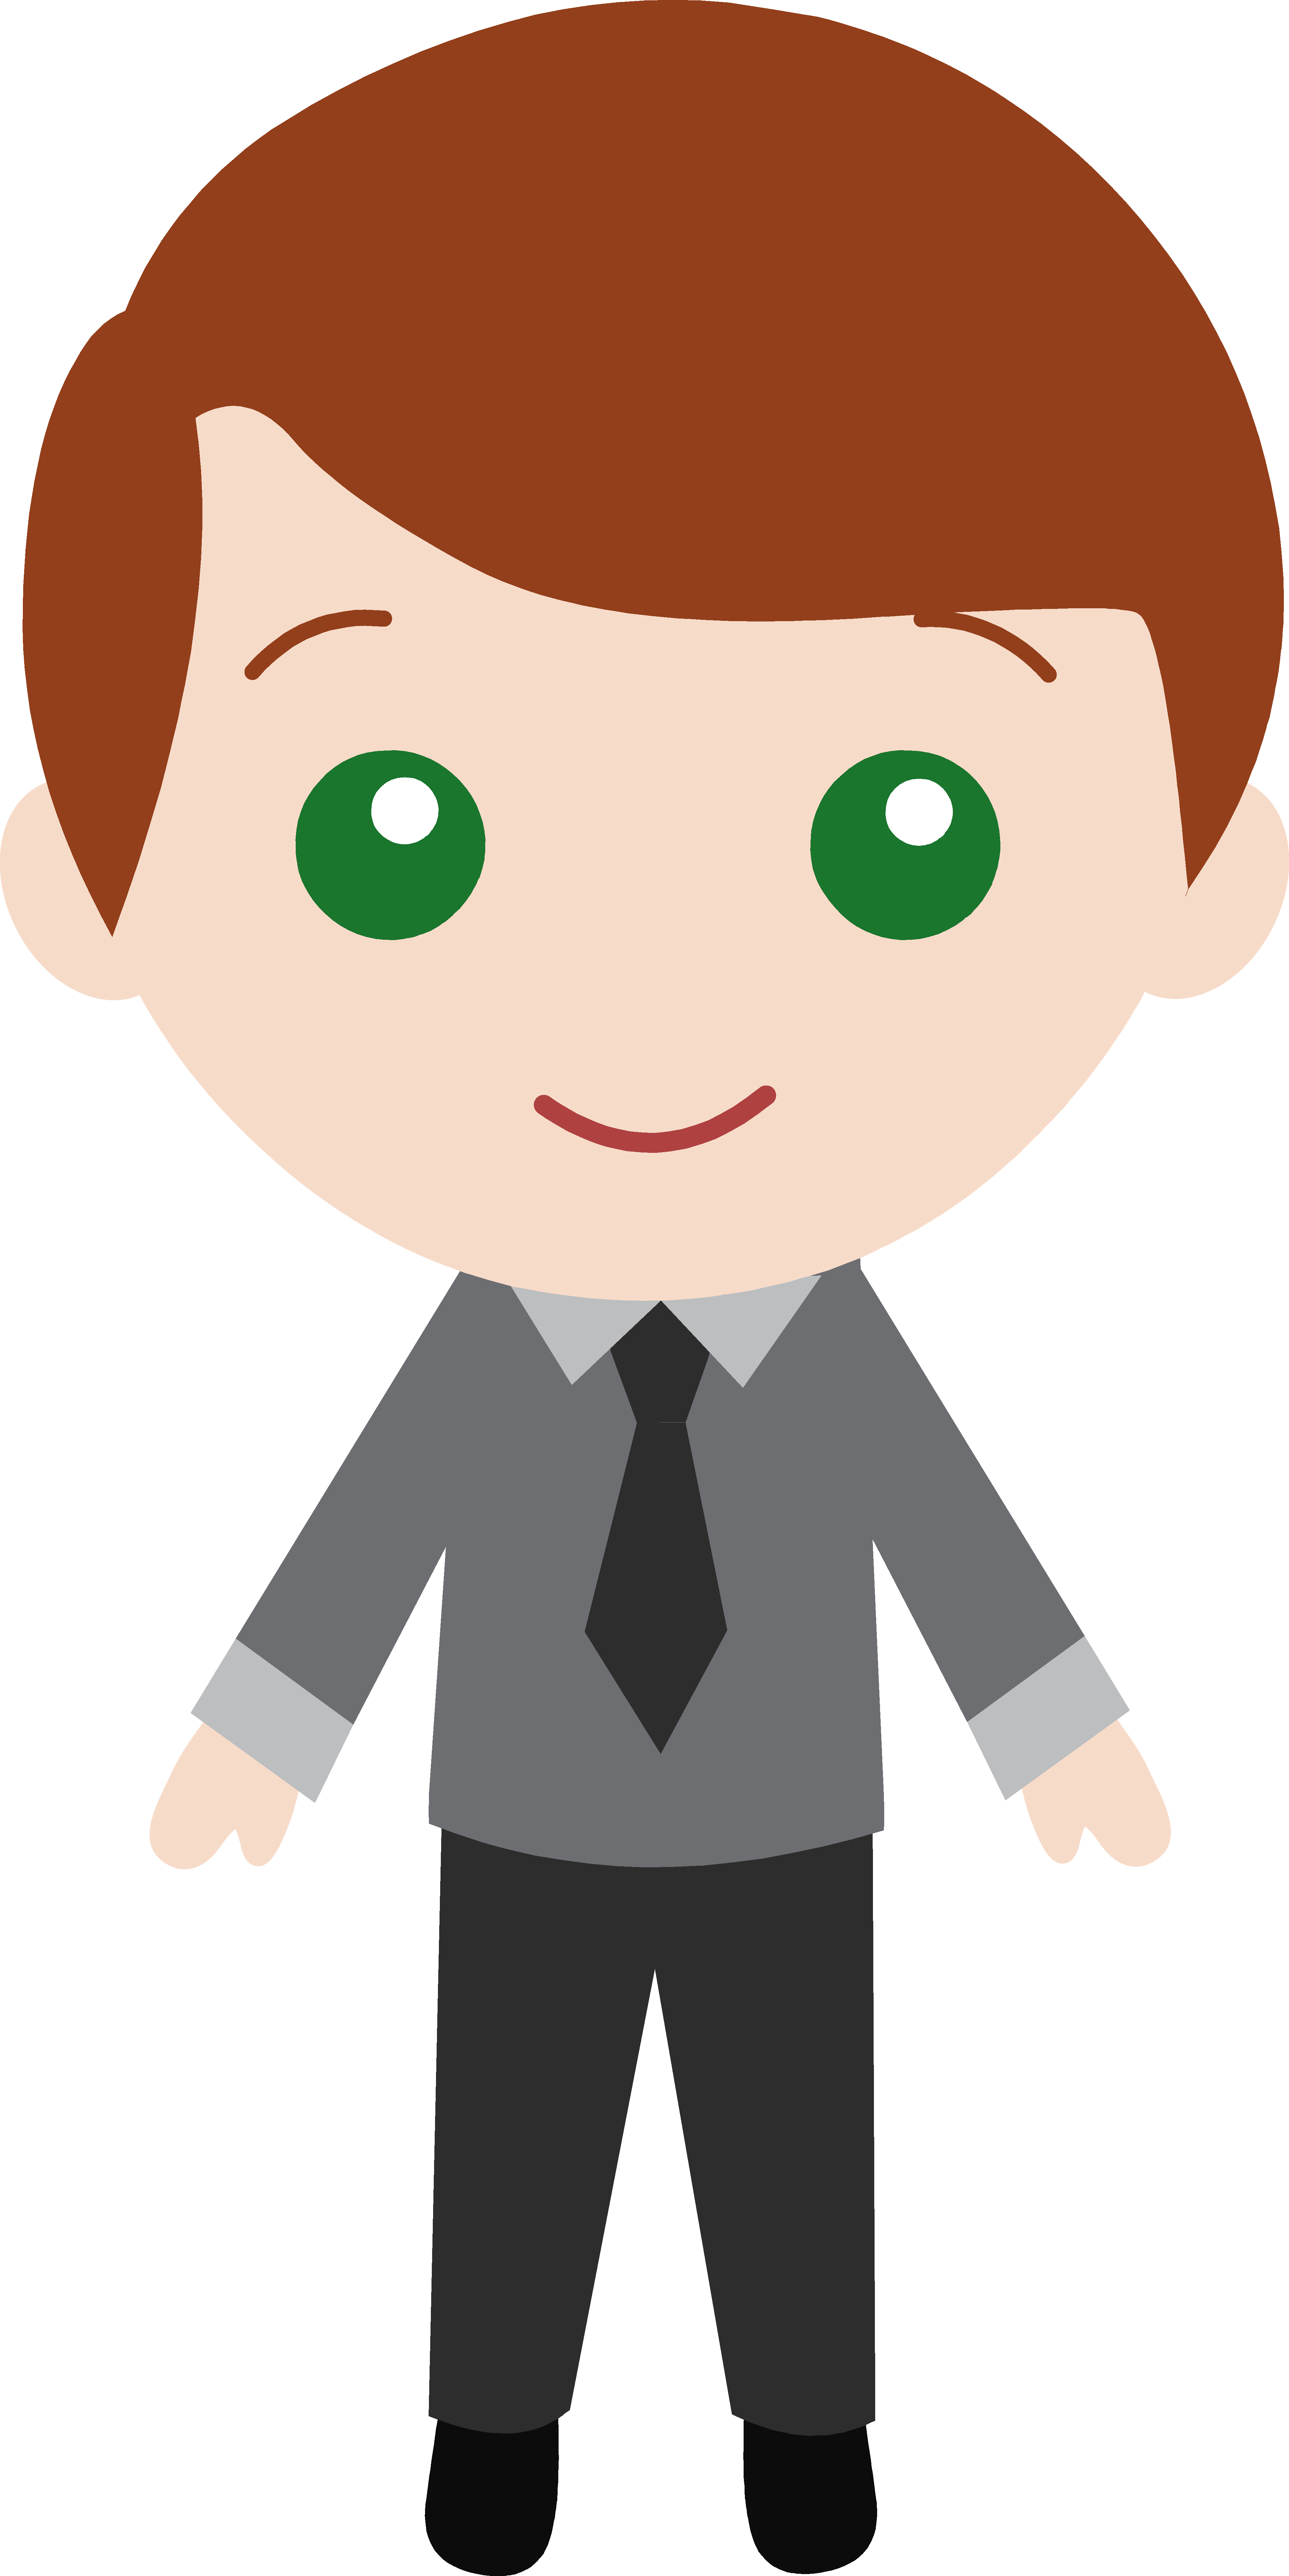 clipart of man in suit - photo #10